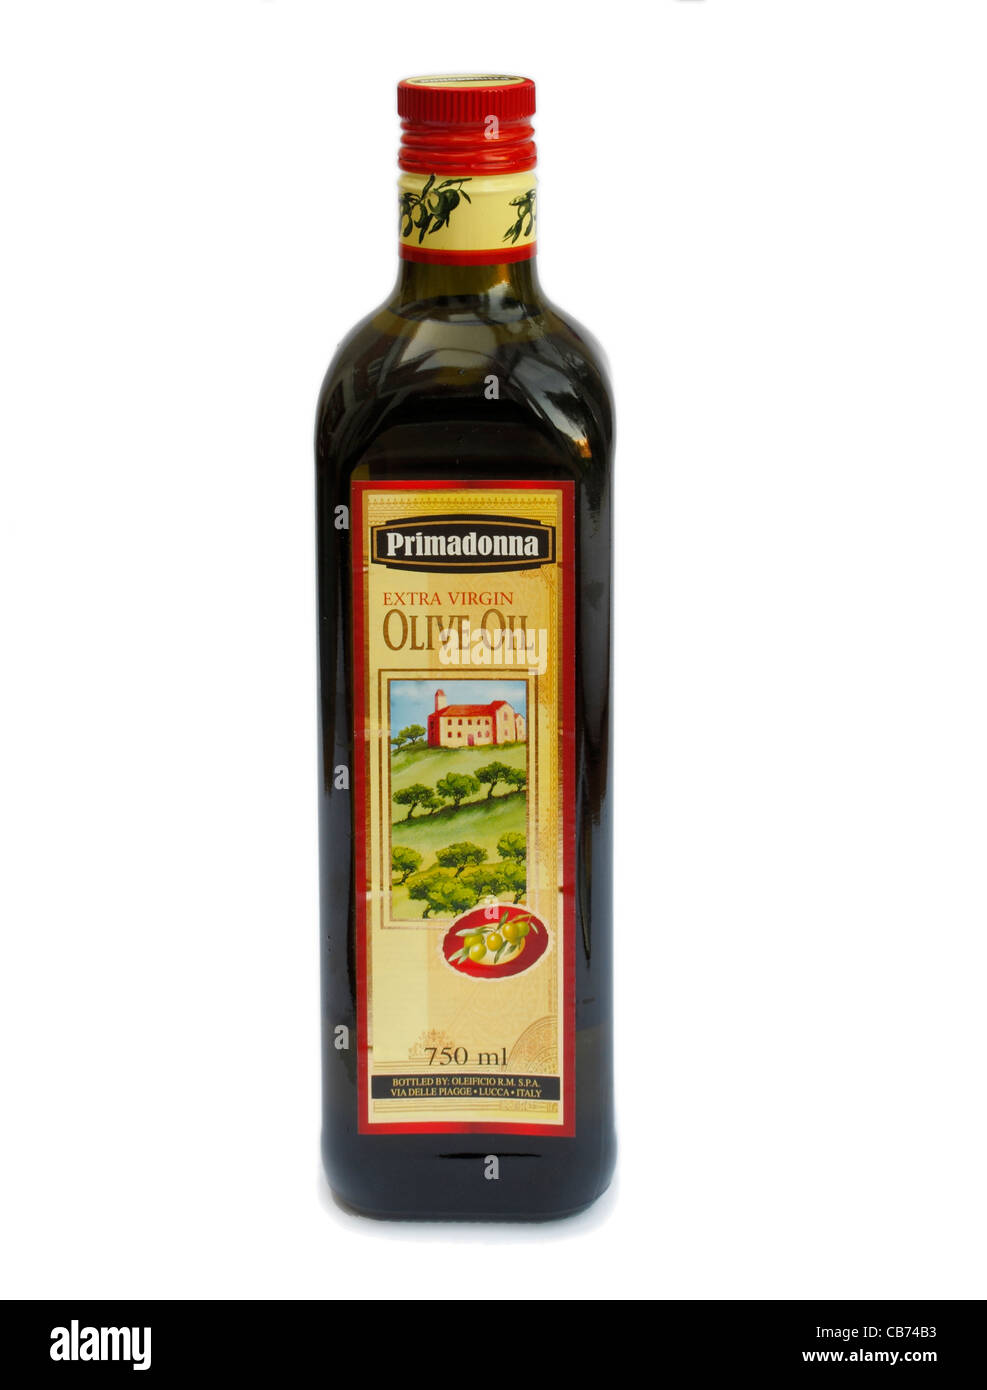 0.7 litre square glass bottle of extra virgin olive oil Primadonna brand sold by Lidl Stock Photo